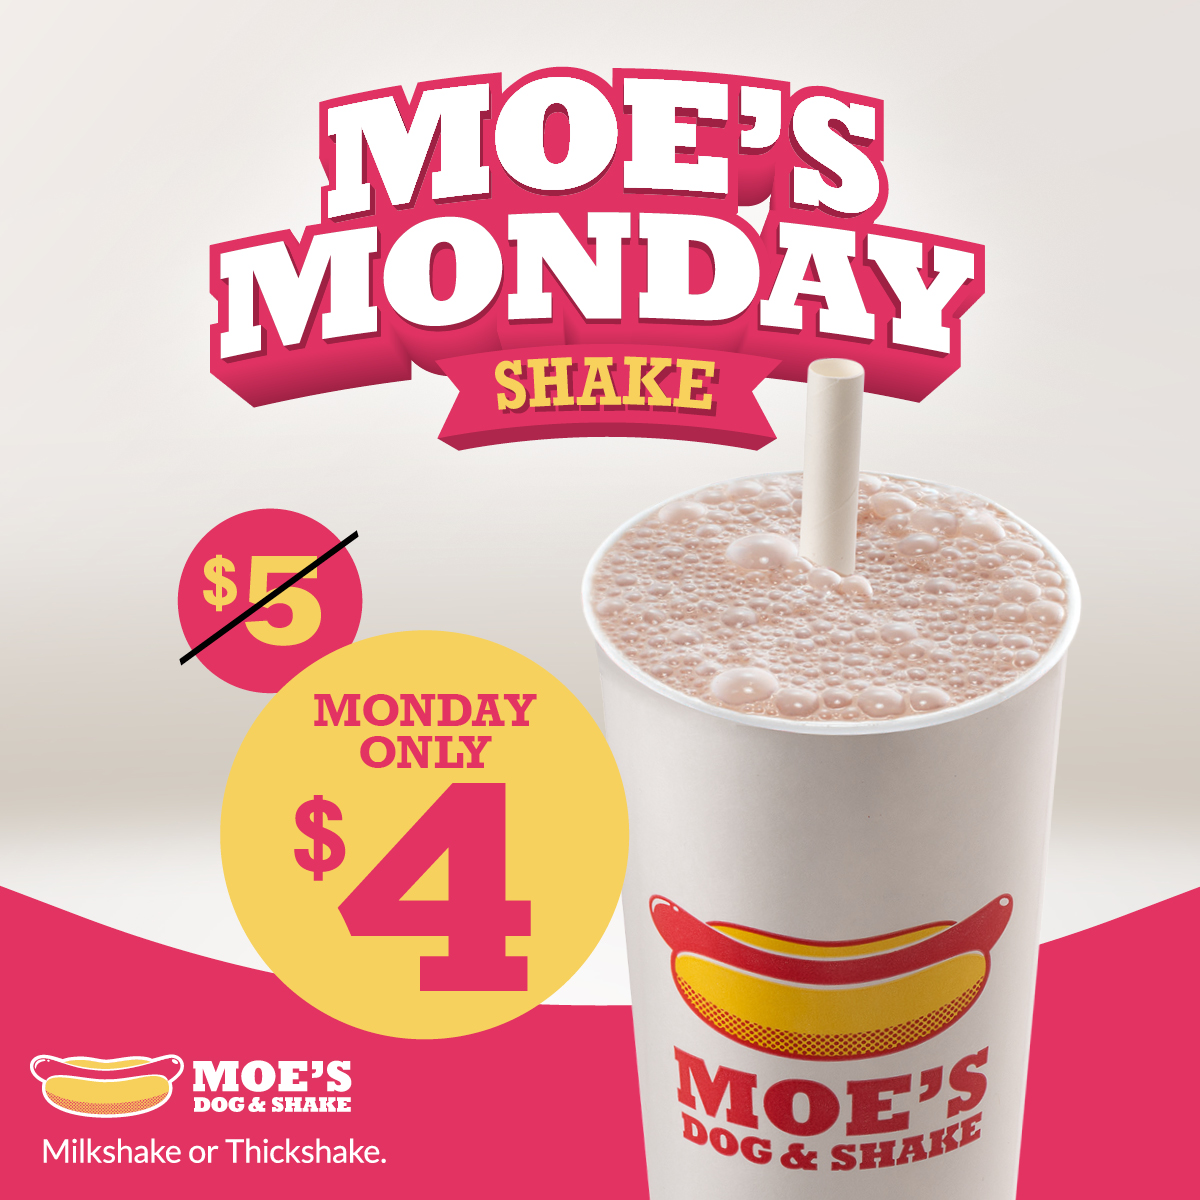 Moes GO A MOES $4 Shake - Website Specials Page 1200x1200px FINAL